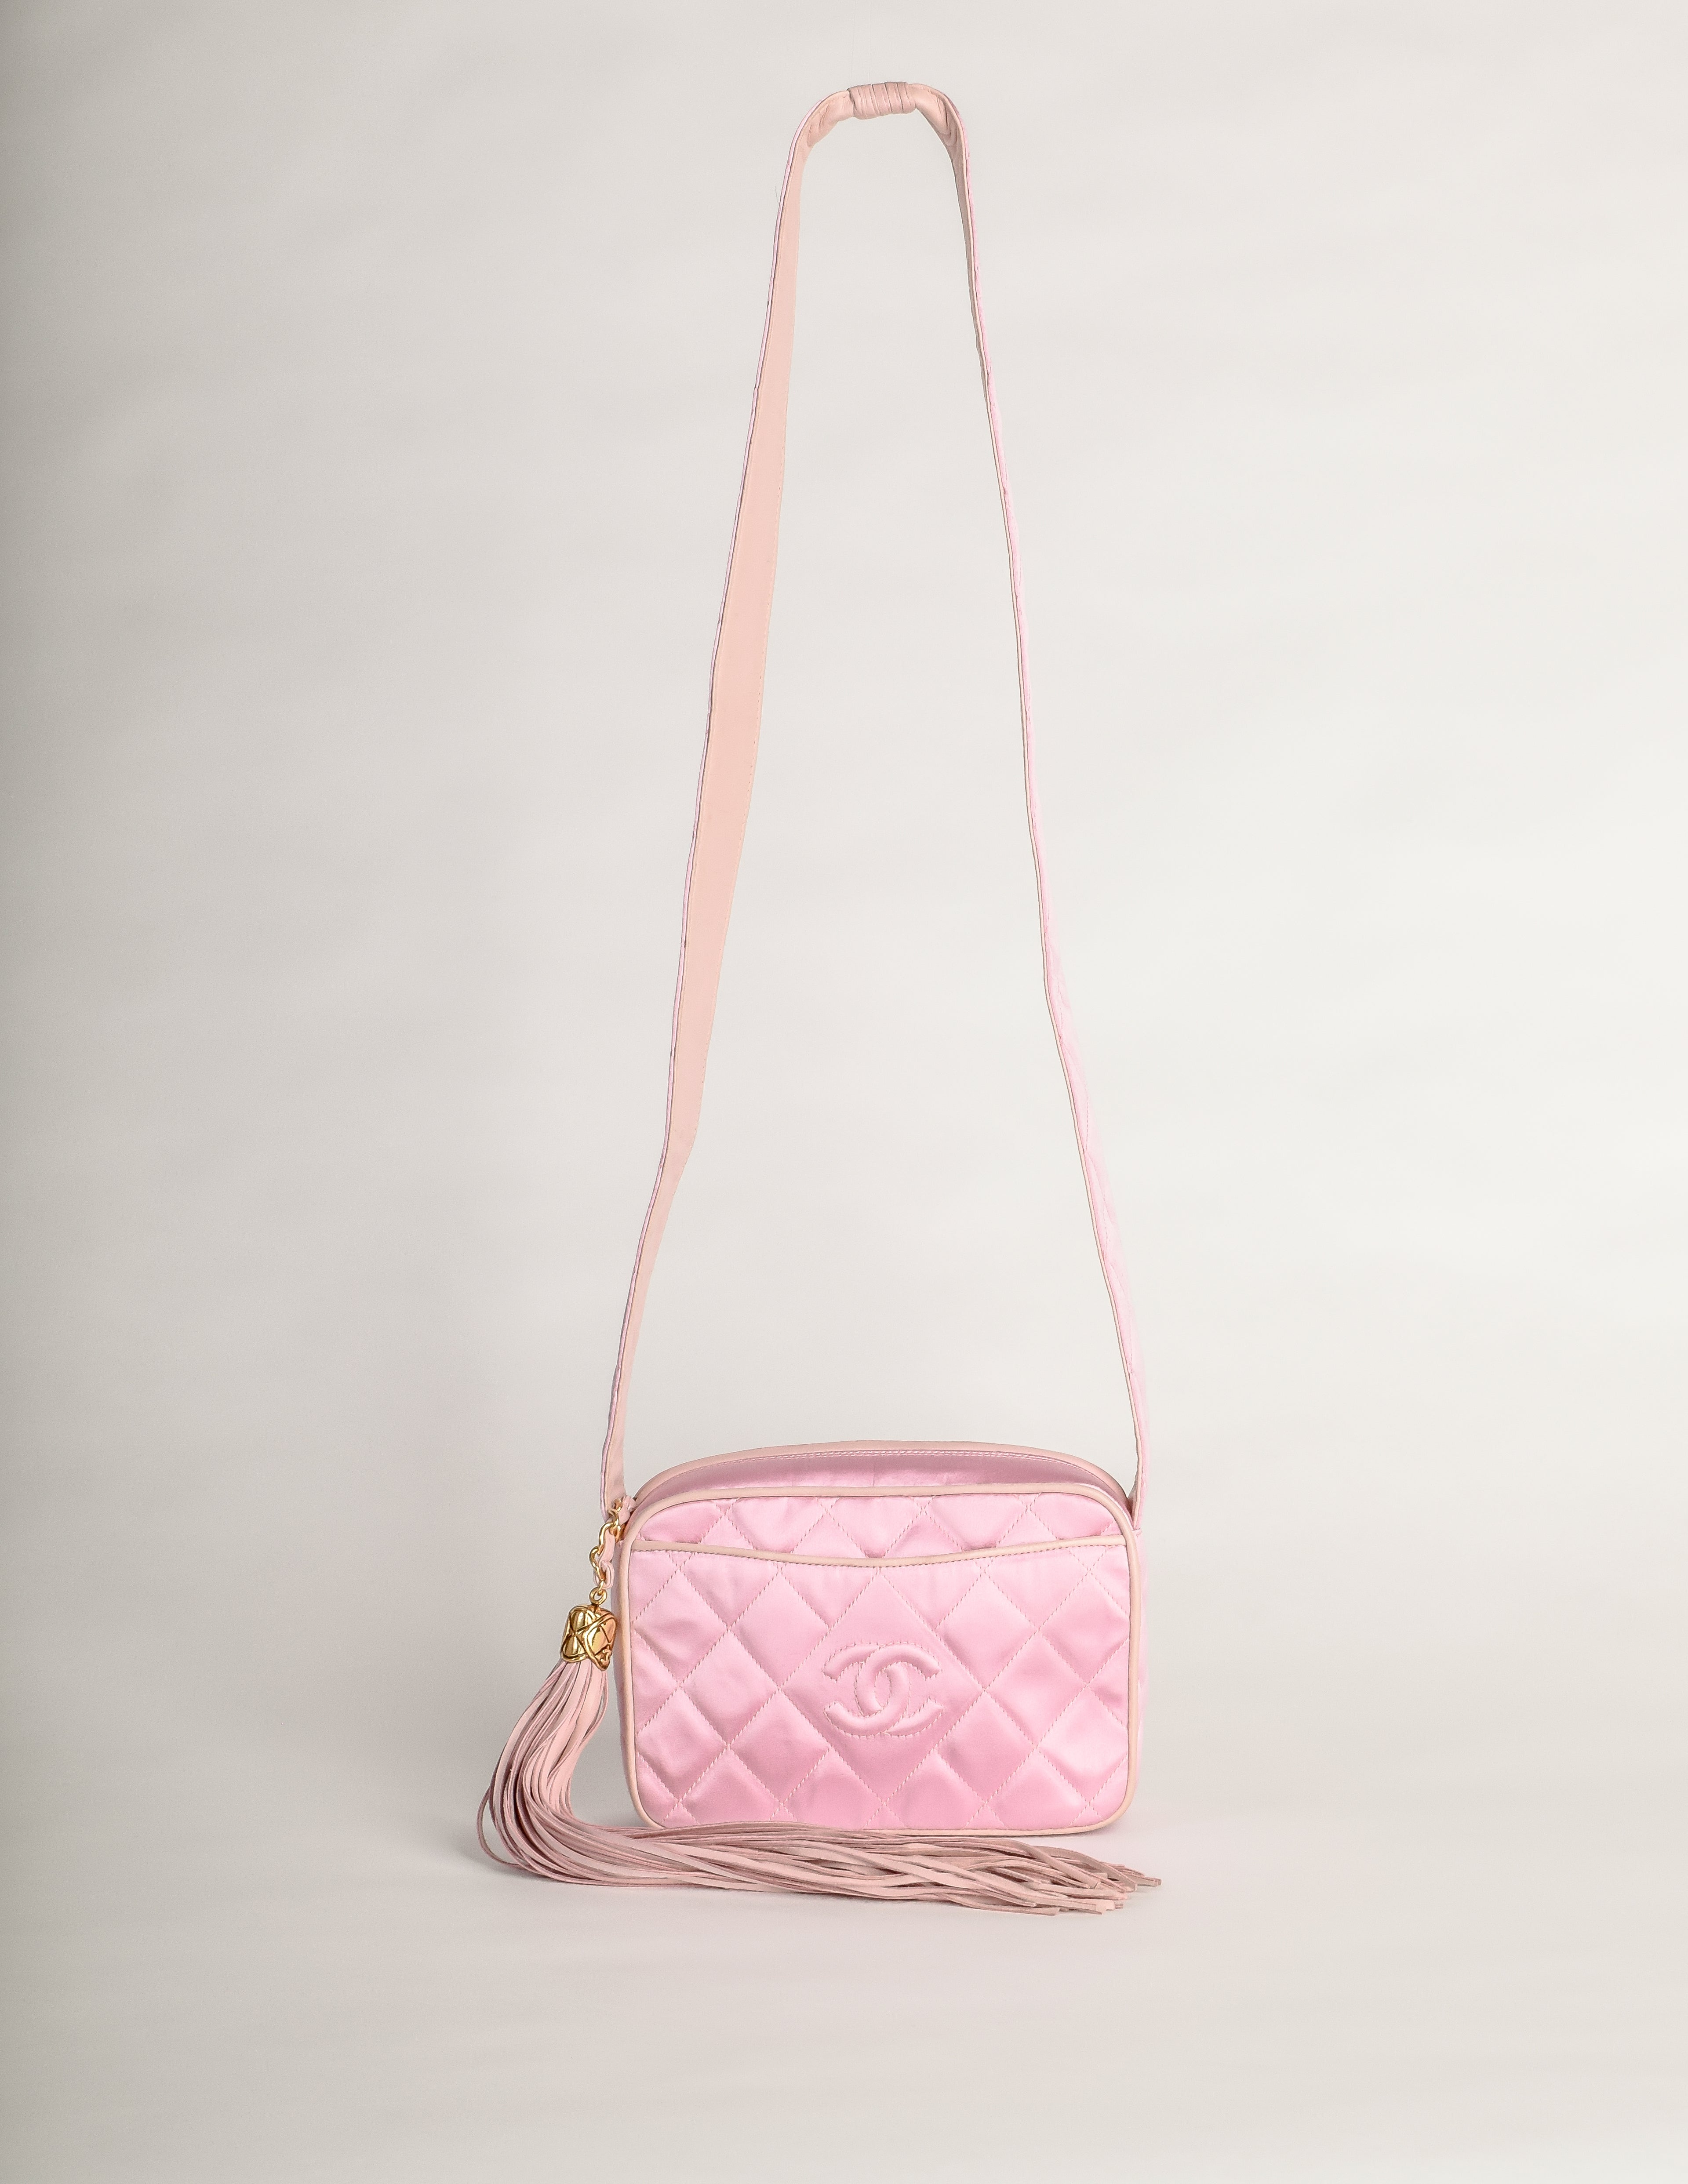 Chanel Vintage Quilted Baby Pink Satin Tassel Bag - from Amarcord ...